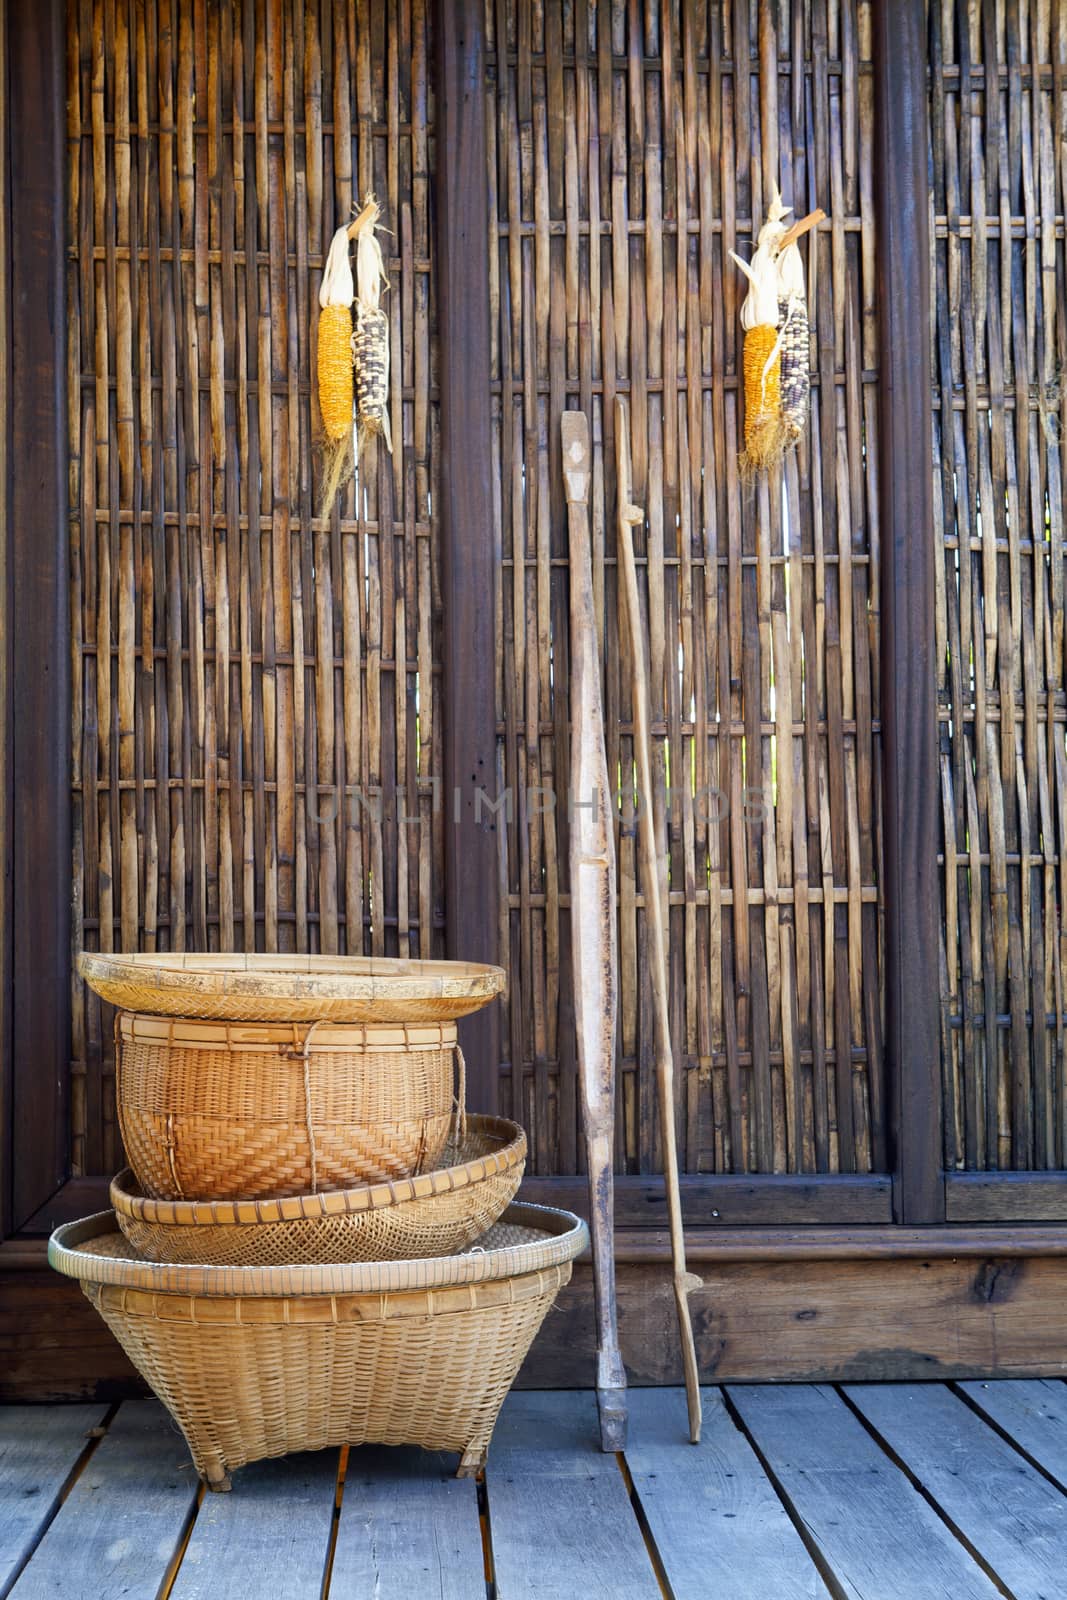 thai bamboo basket hand craft with wood wall  rural home scene in thailand